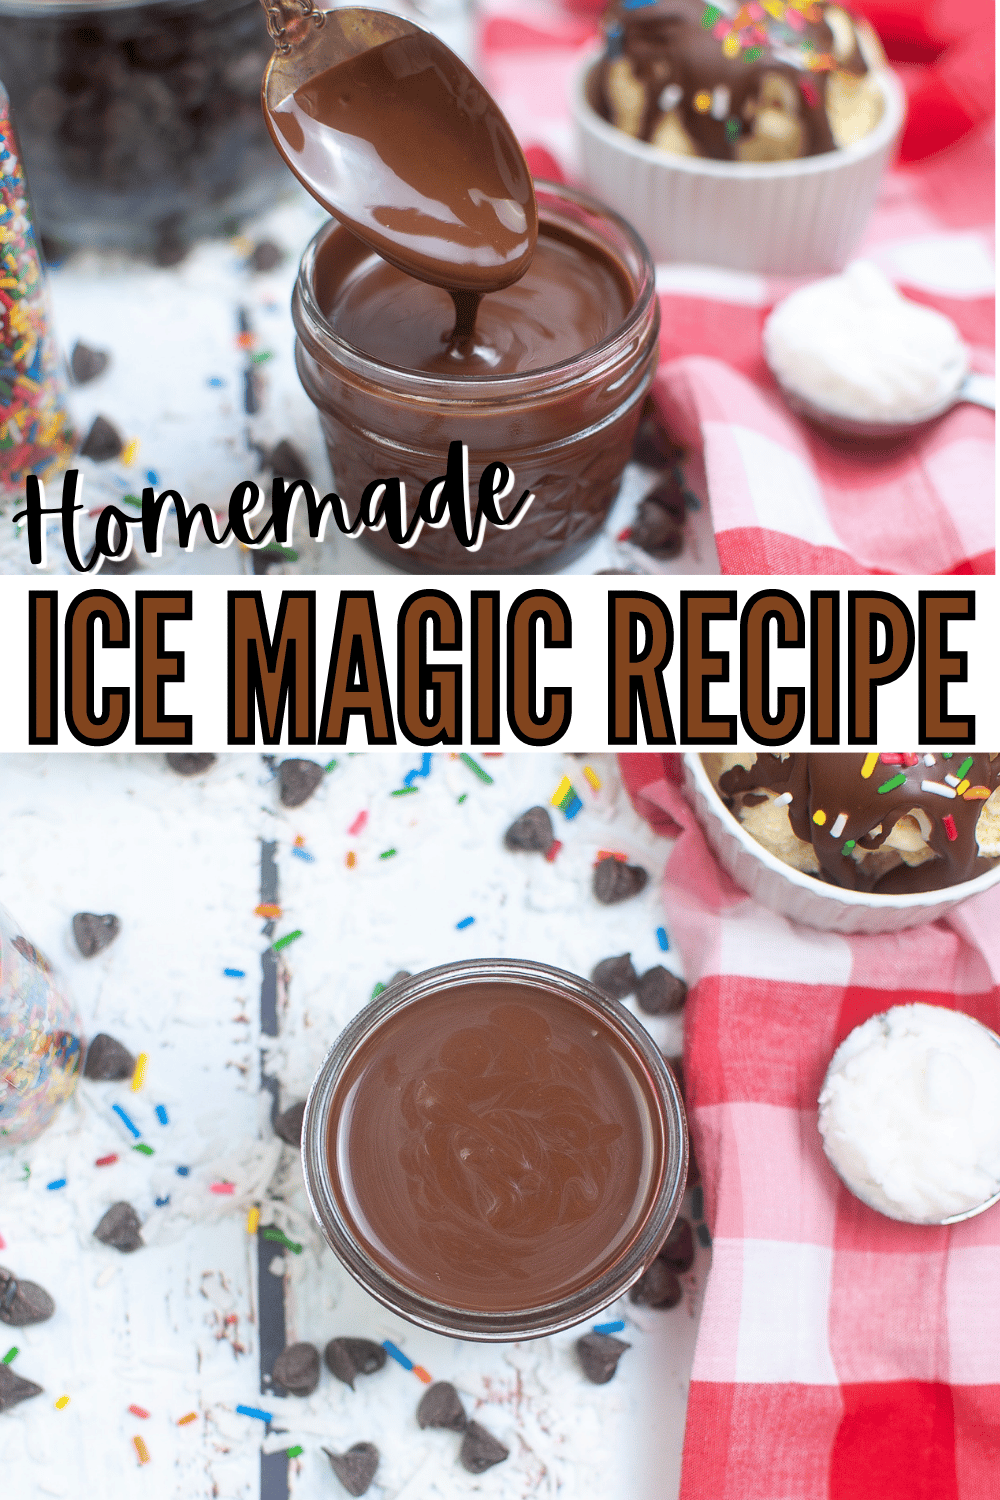 This Ice Magic recipe is a classic! It’s so easy to make with just two ingredients and it hardens instantly when poured over ice cream. #icemagicrecipe #homemadeicemagic #icemagic #icecreamtopping via @wondermomwannab